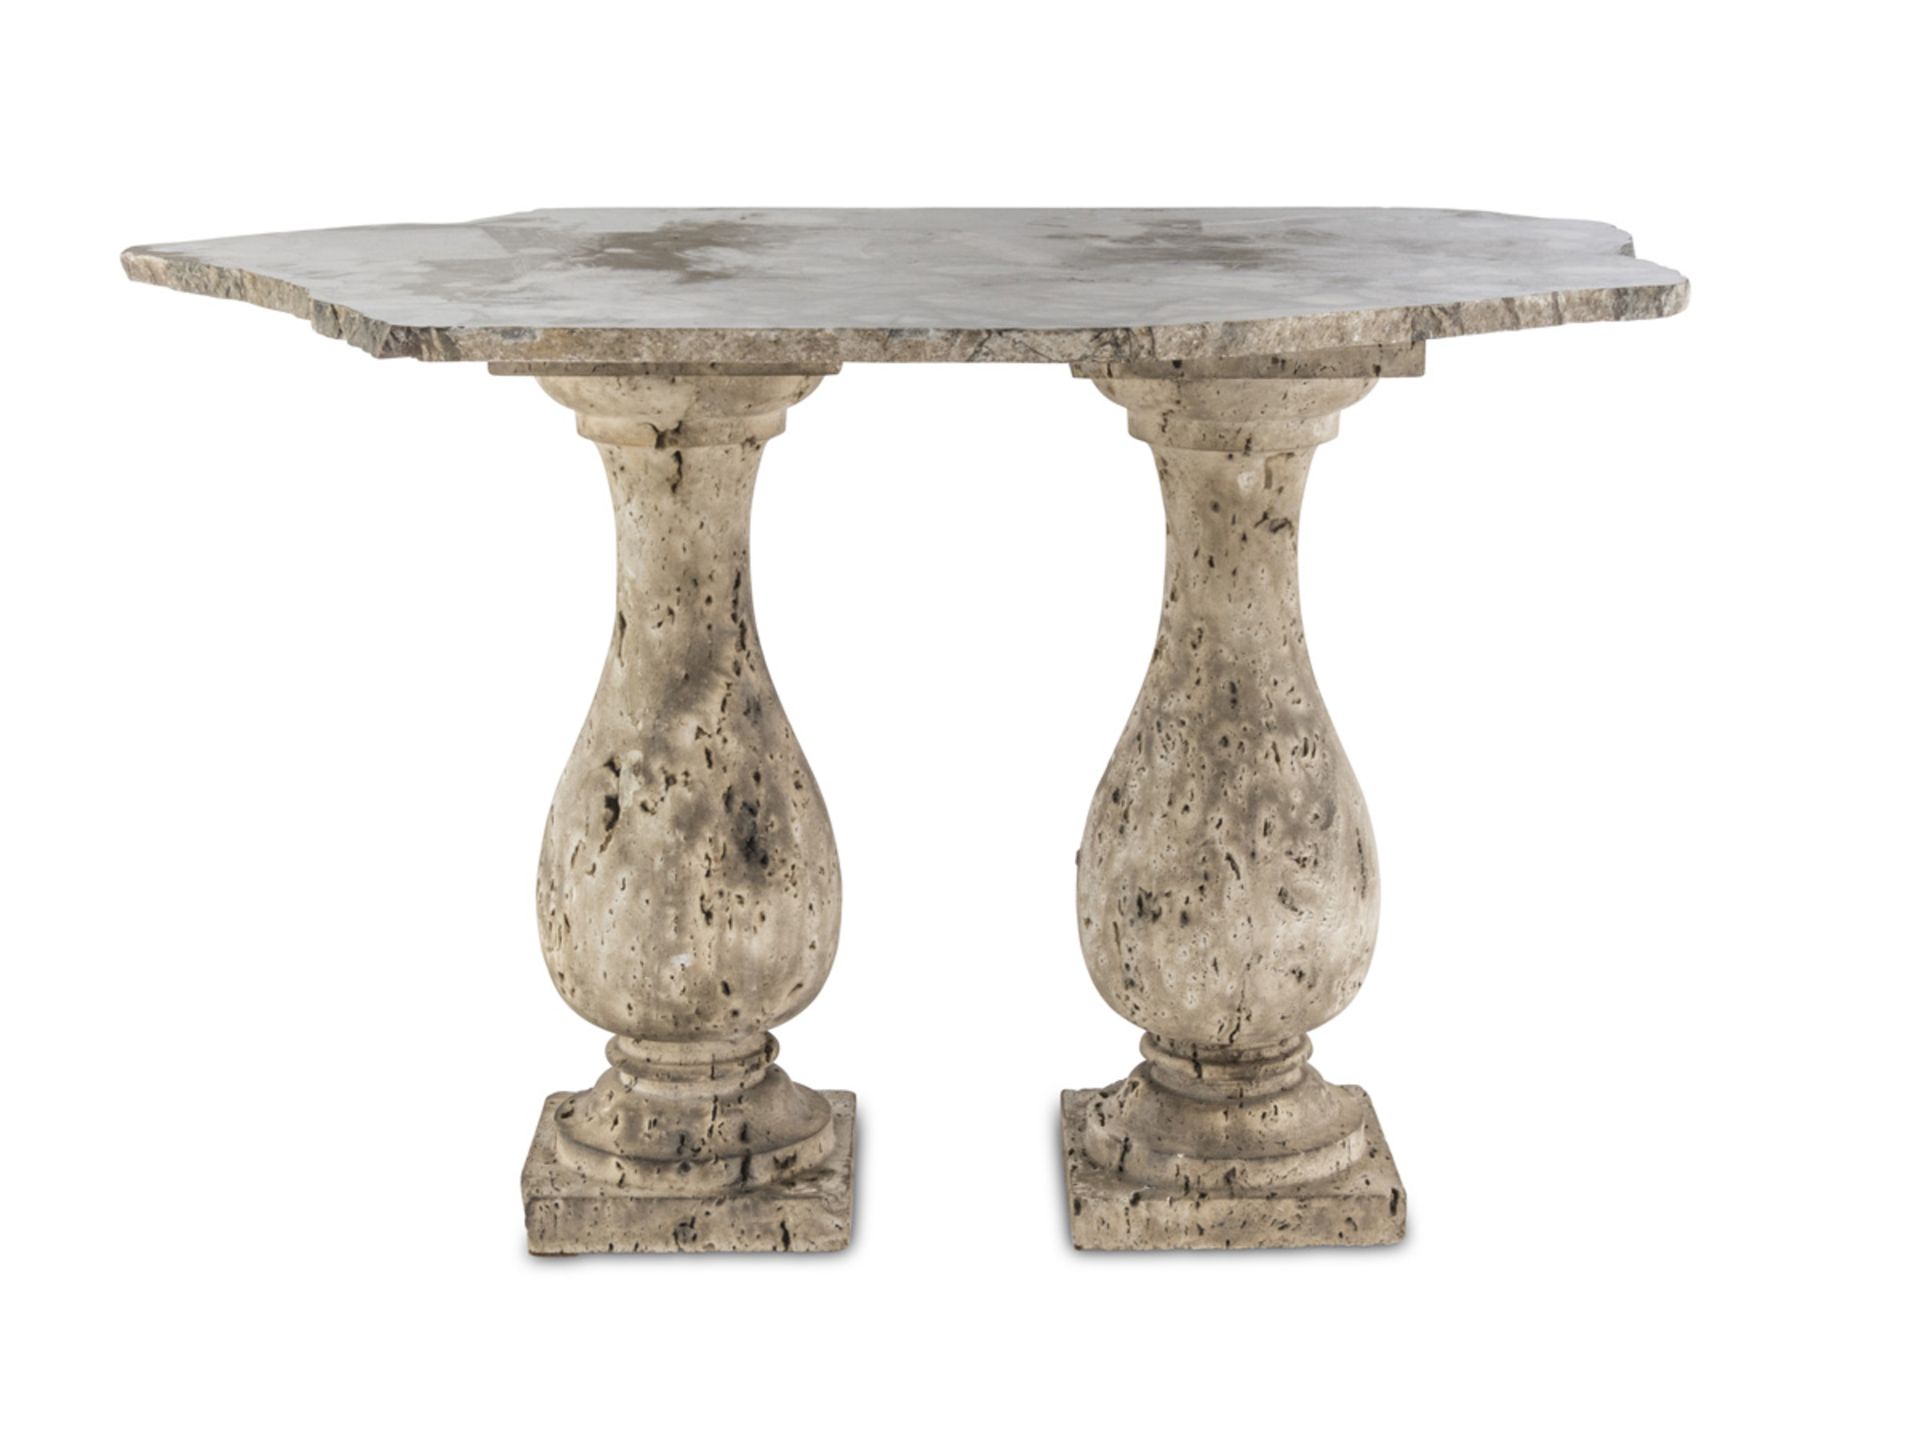 SMALL MARBLE TABLE ANTIQUE ELEMENTS